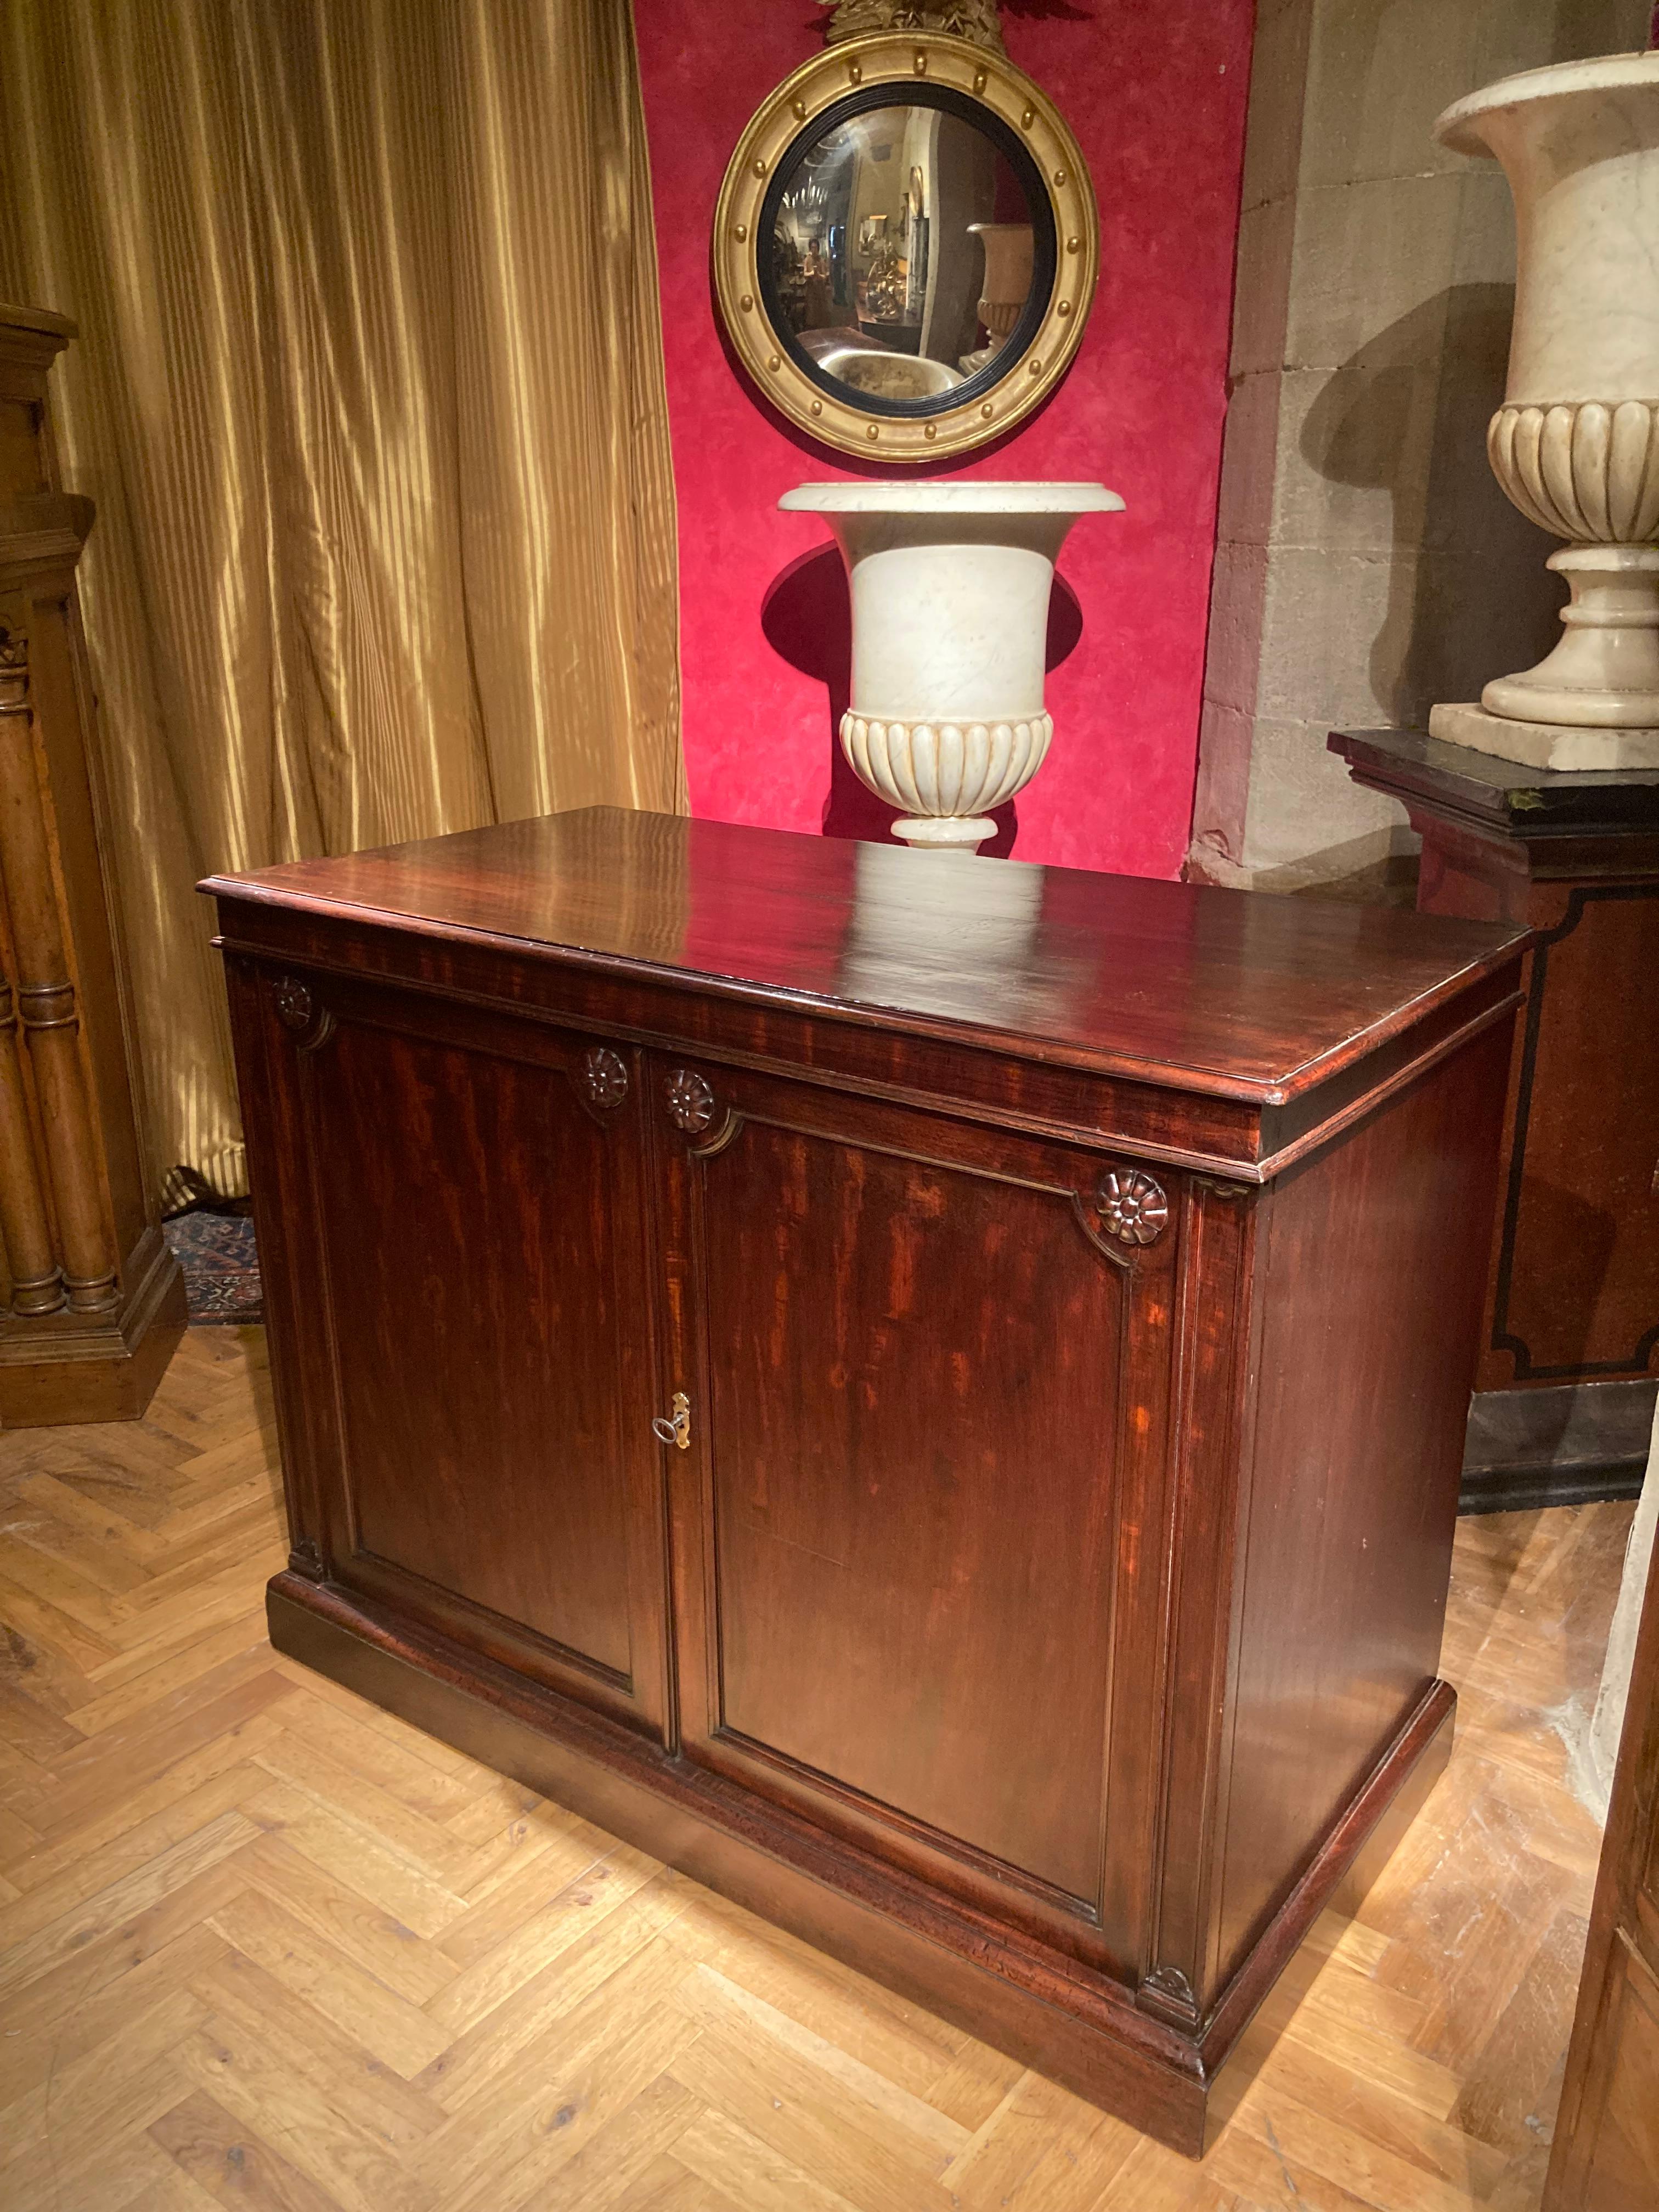 Striking mahogany 19th century Italian commode from the Empire period, circa 1815-1820. The straight, timeless shape combined with unique mahogany veneer makes this early 19th century trumeau commode an absolute dreamlike piece that can anchor any